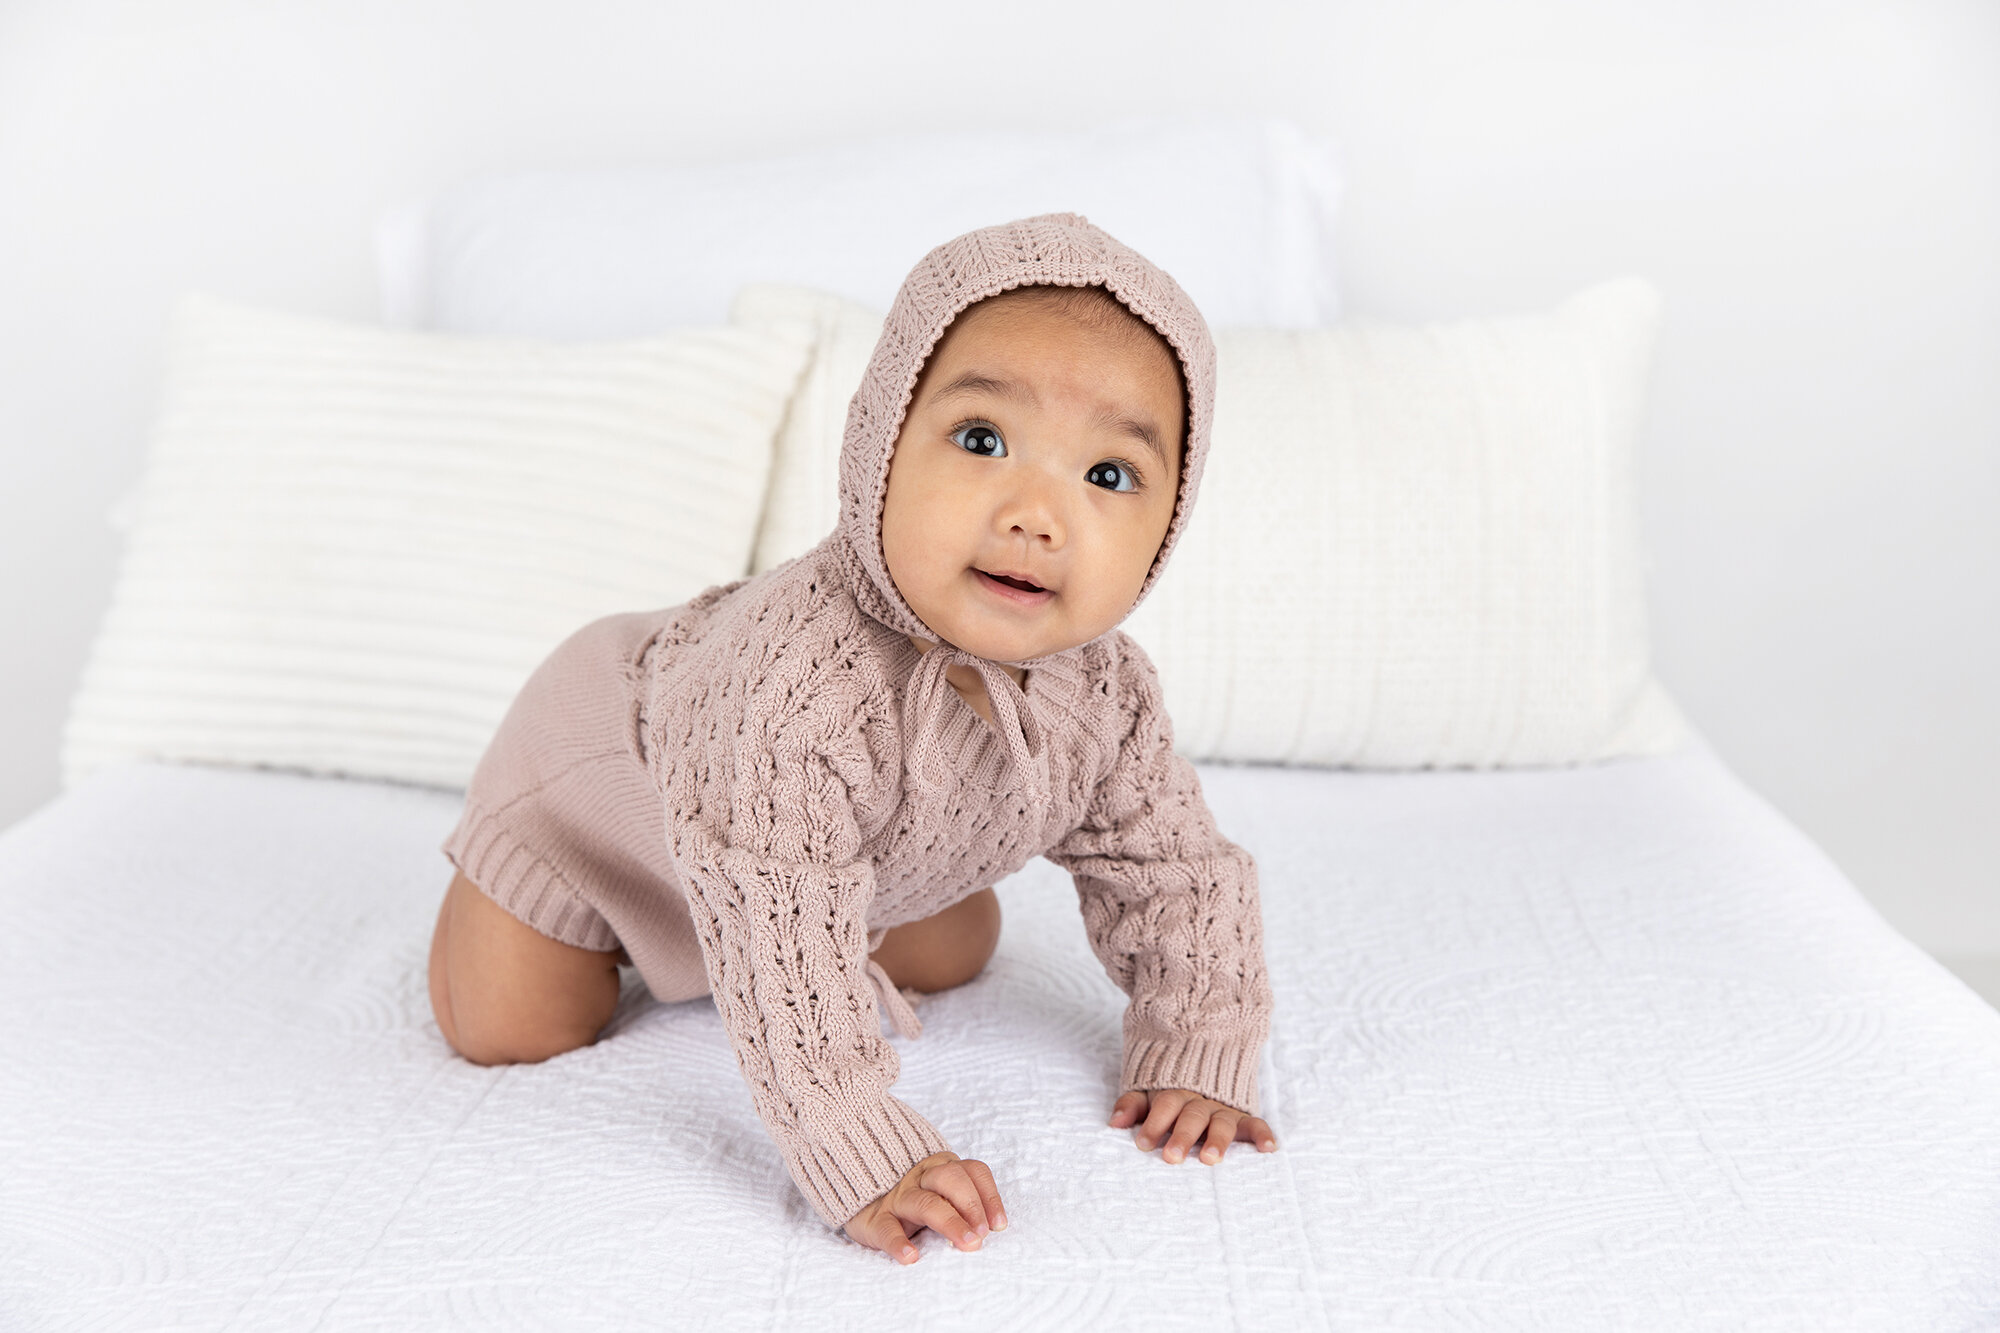 baby girl in a mauve knit outfit and bonnet crawling